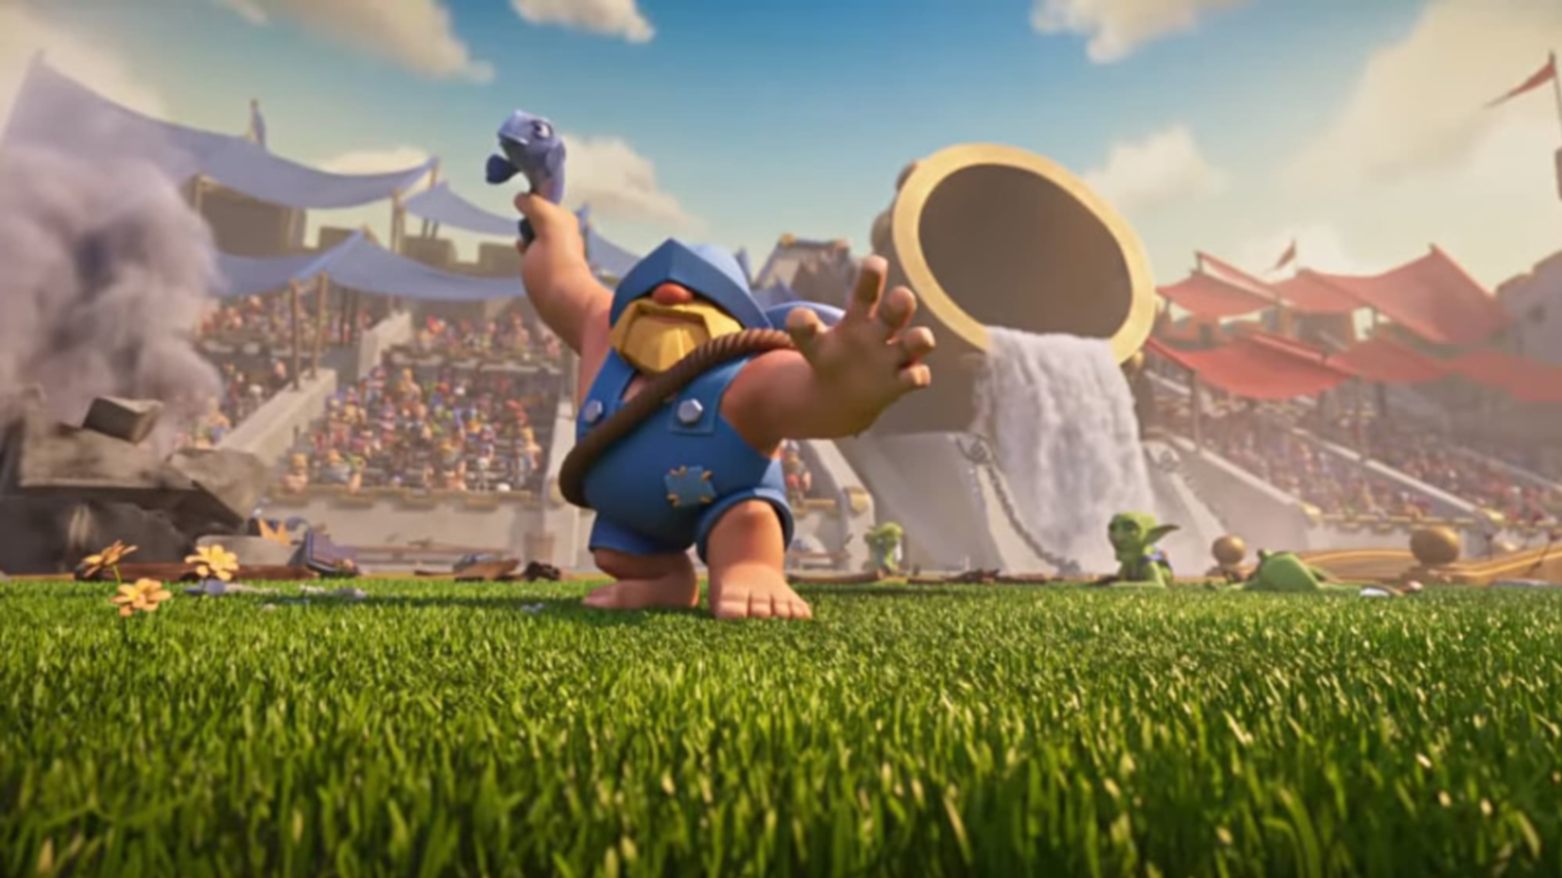 Clash Royale: See the Most Hated Cards and Characters in the Game